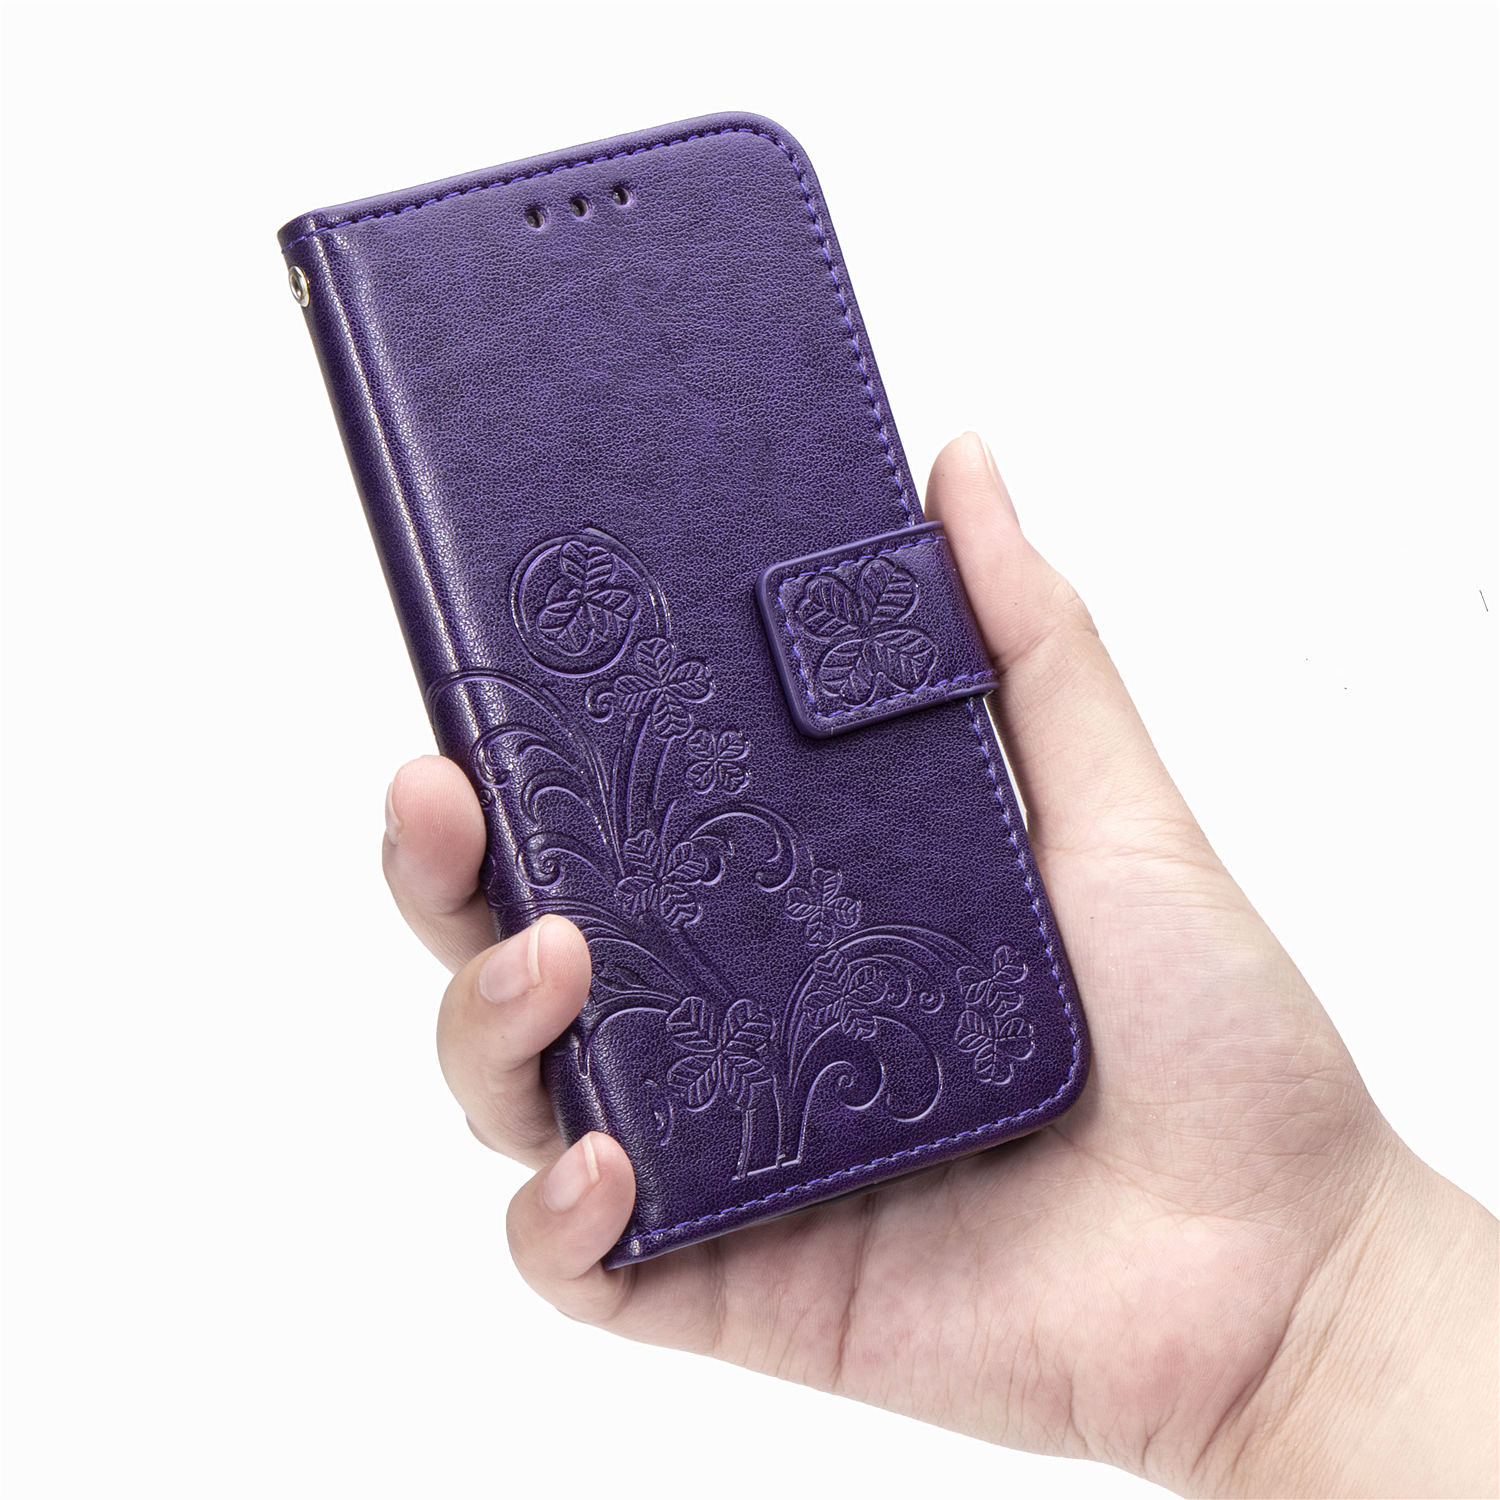 casing OPPO A5 A9 2020 A11 X RENO A F7 PU Phone case four leaf clover flower Bumper Flip Leather Protective Support Cover Magnetic Wallet card slot blue pink gray purple red